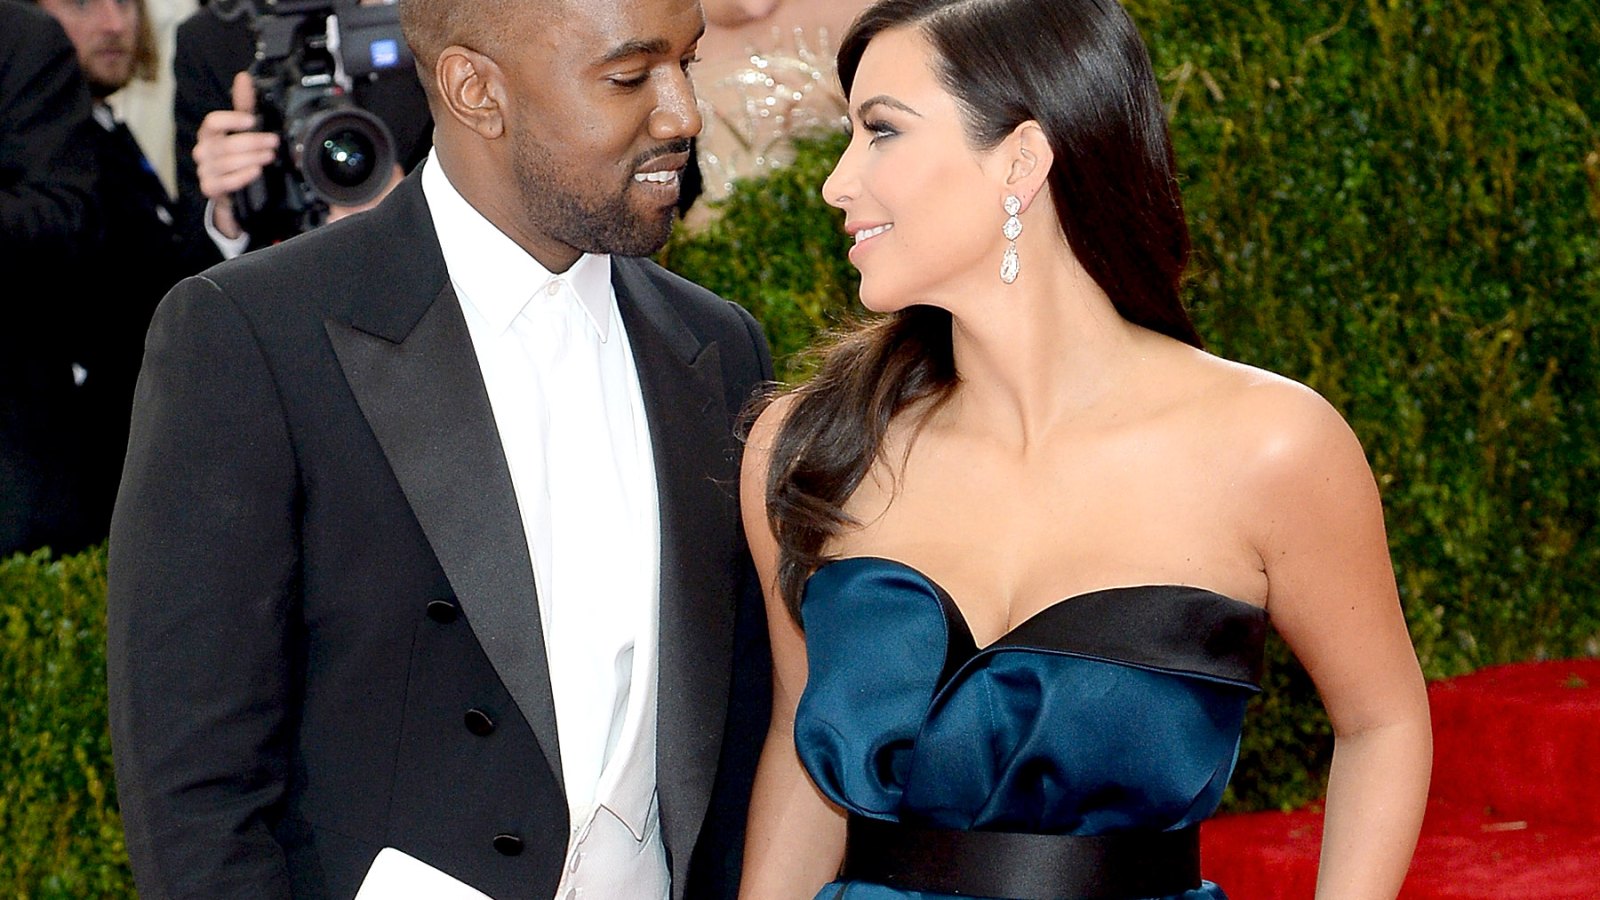 Kanye West and Kim Kardashian at the Costume Institute Gala on May 5